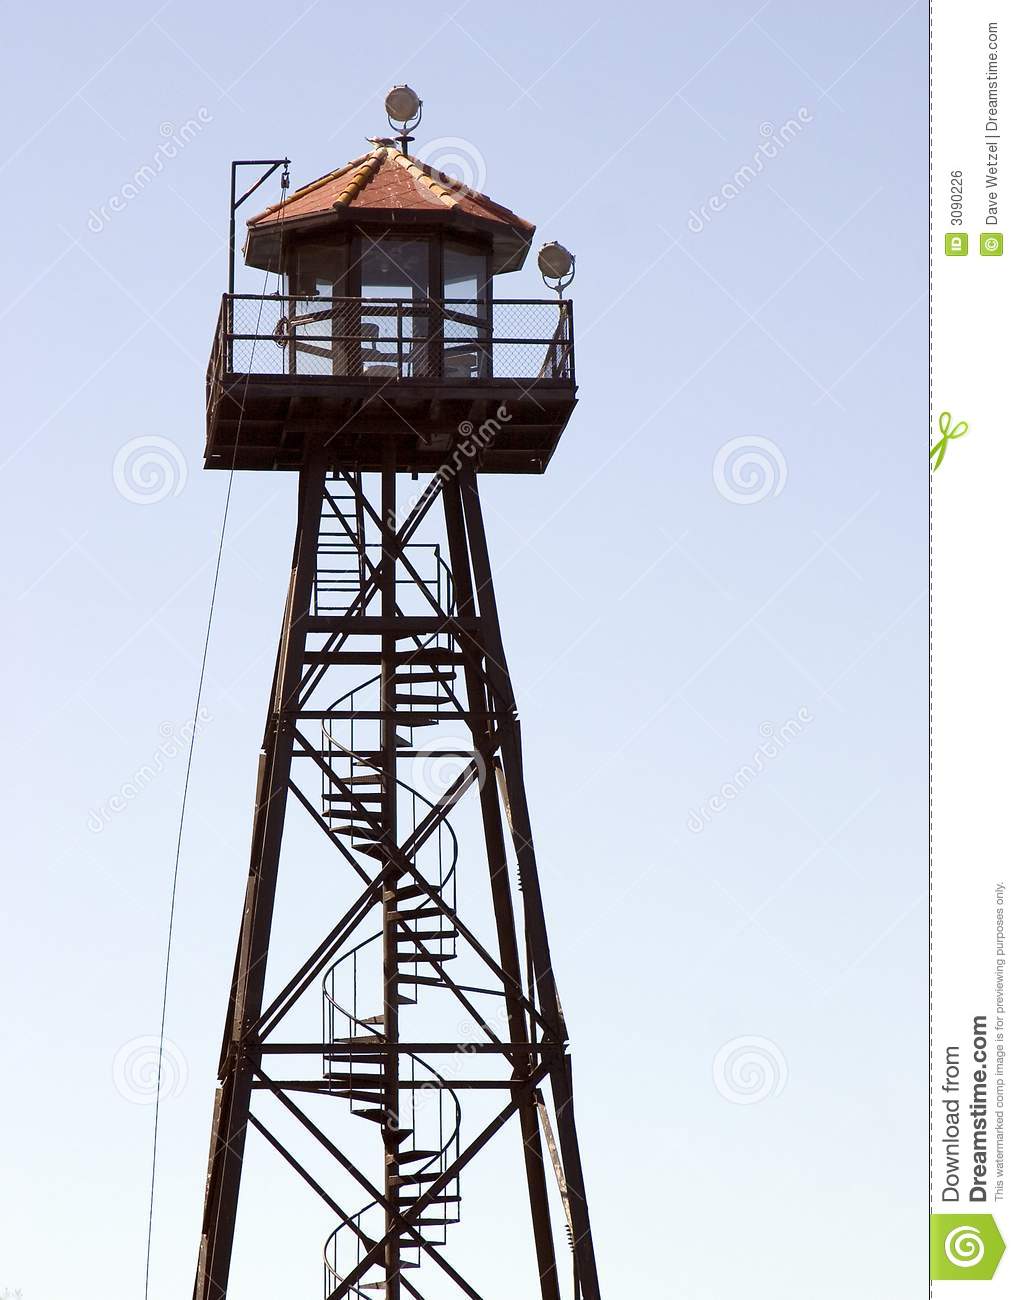 Prison Guard Tower Royalty Free Stock Image.